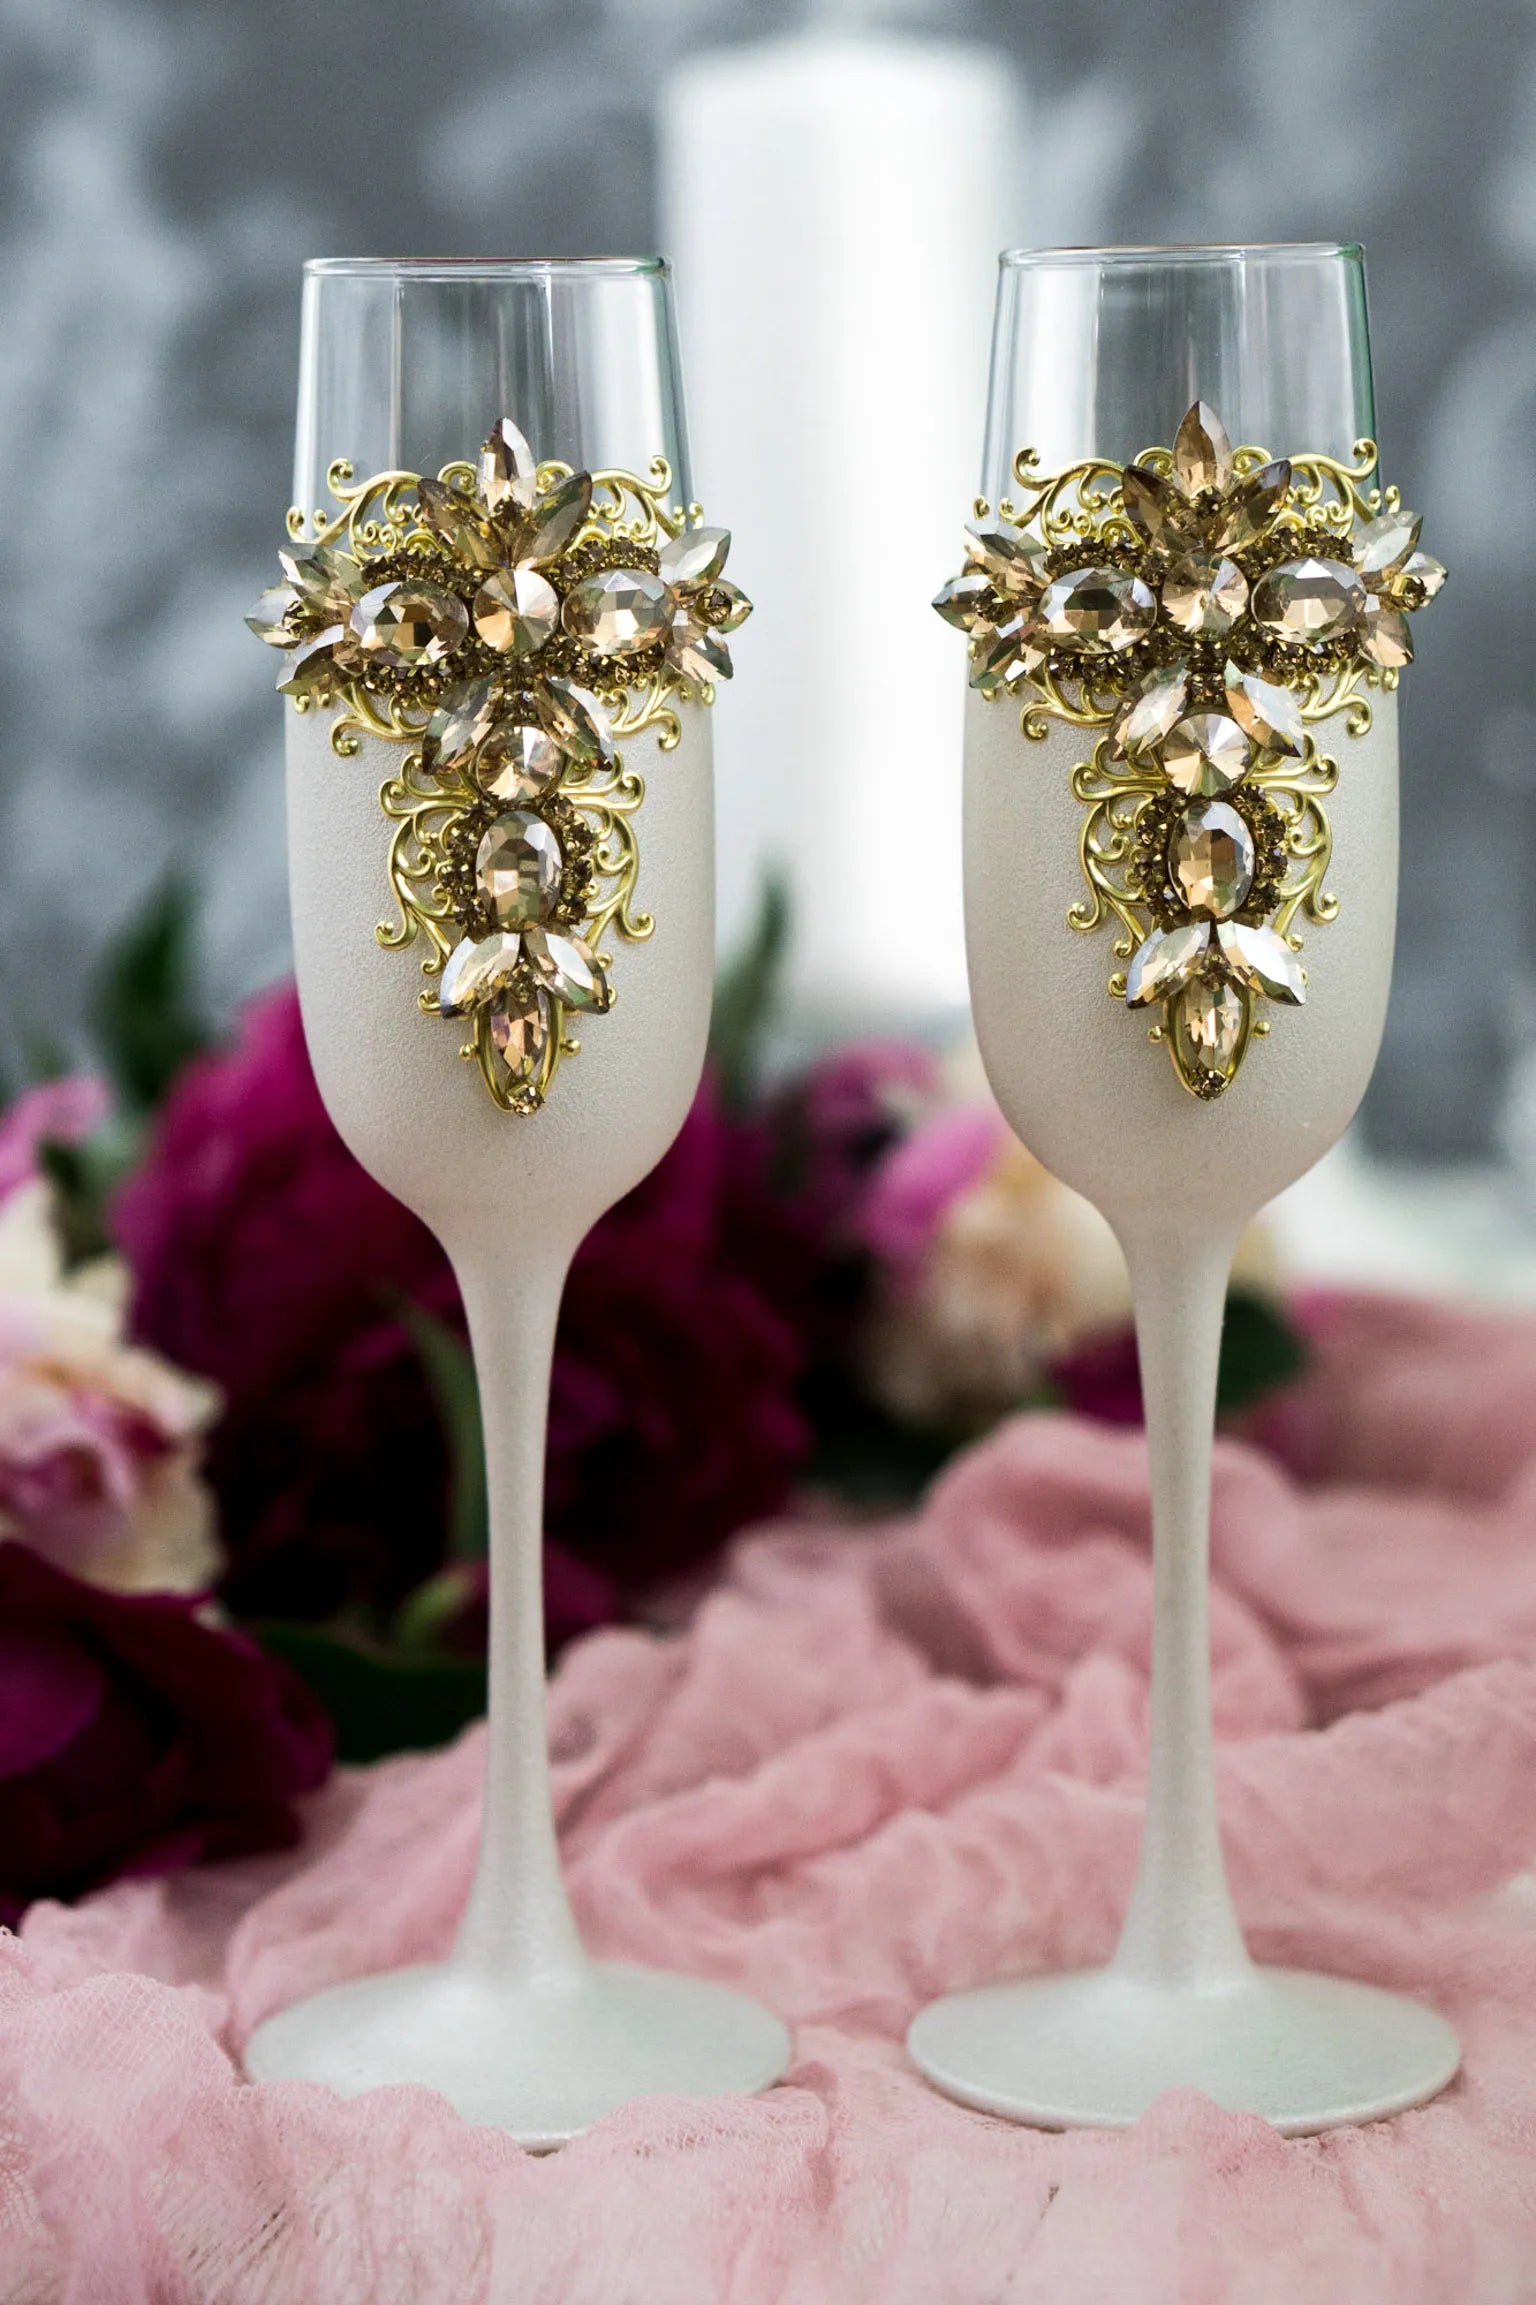 Customizable wedding champagne glasses in gold and white